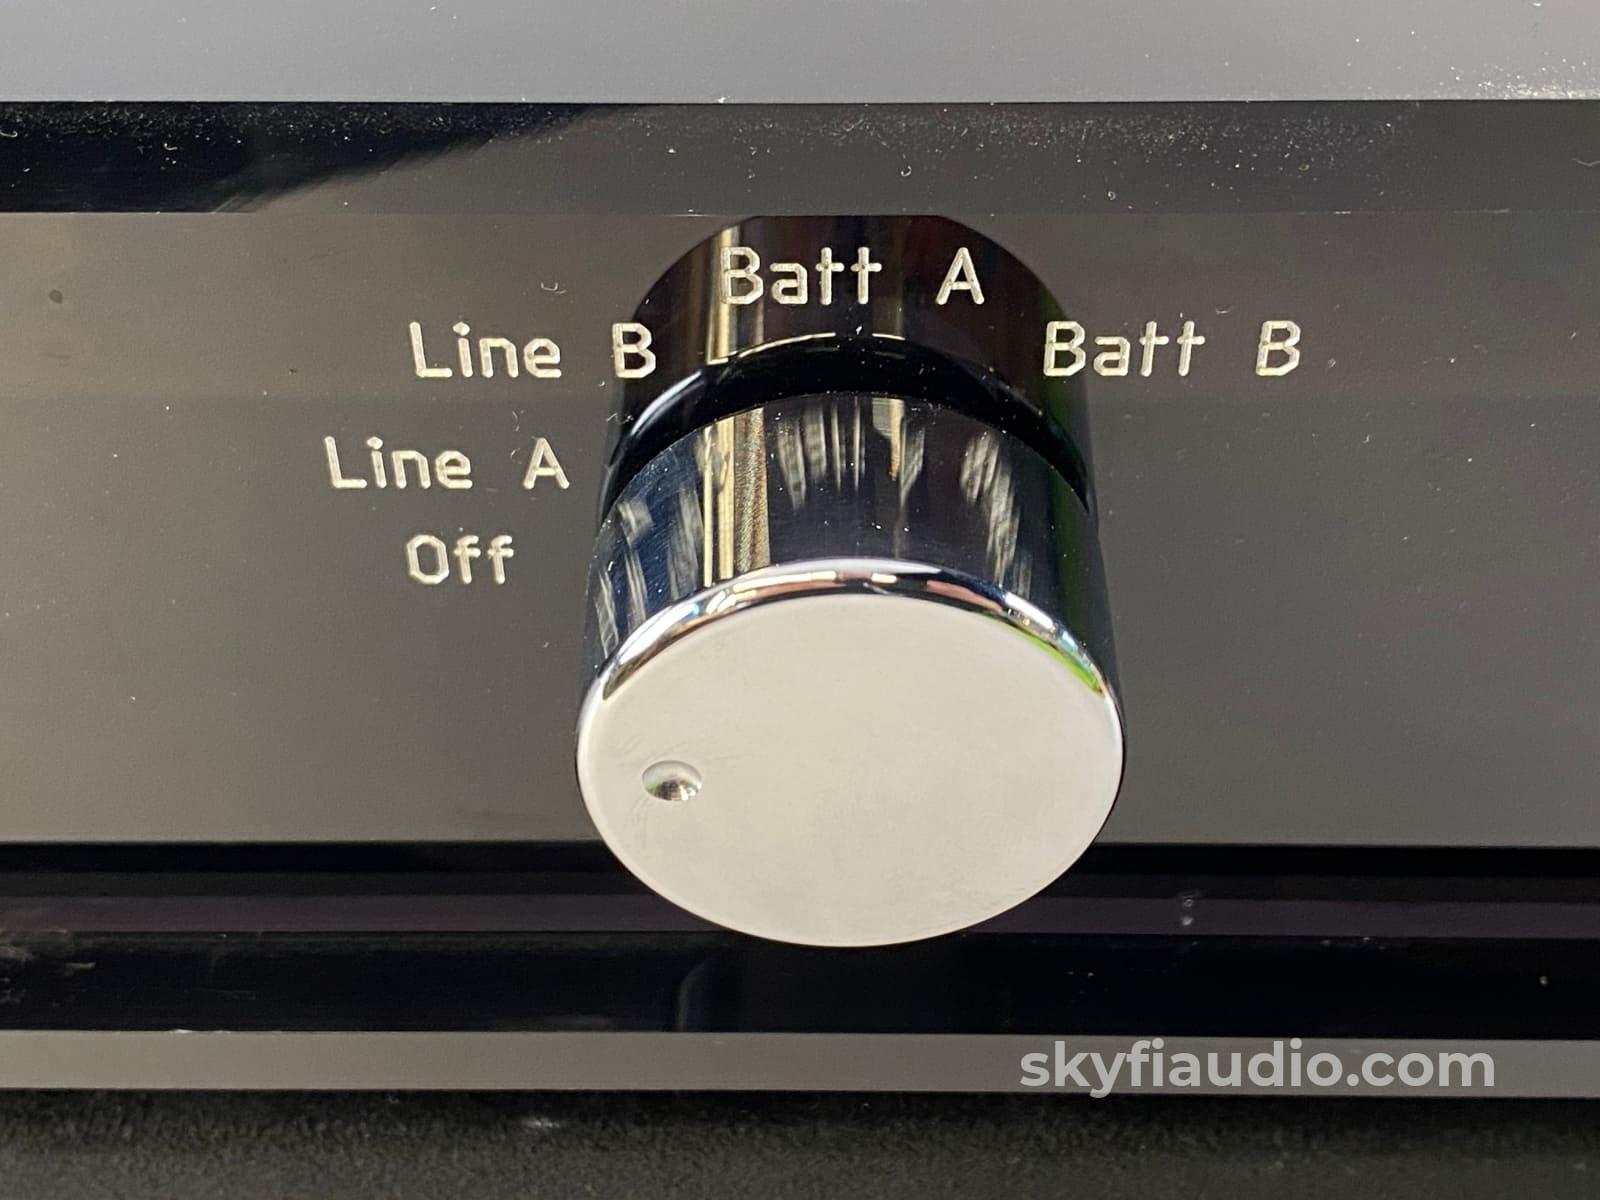 Asr Basis Exclusive 2X Mkii - Battery Powered Phono Preamp Absolutely Stunning Preamplifier